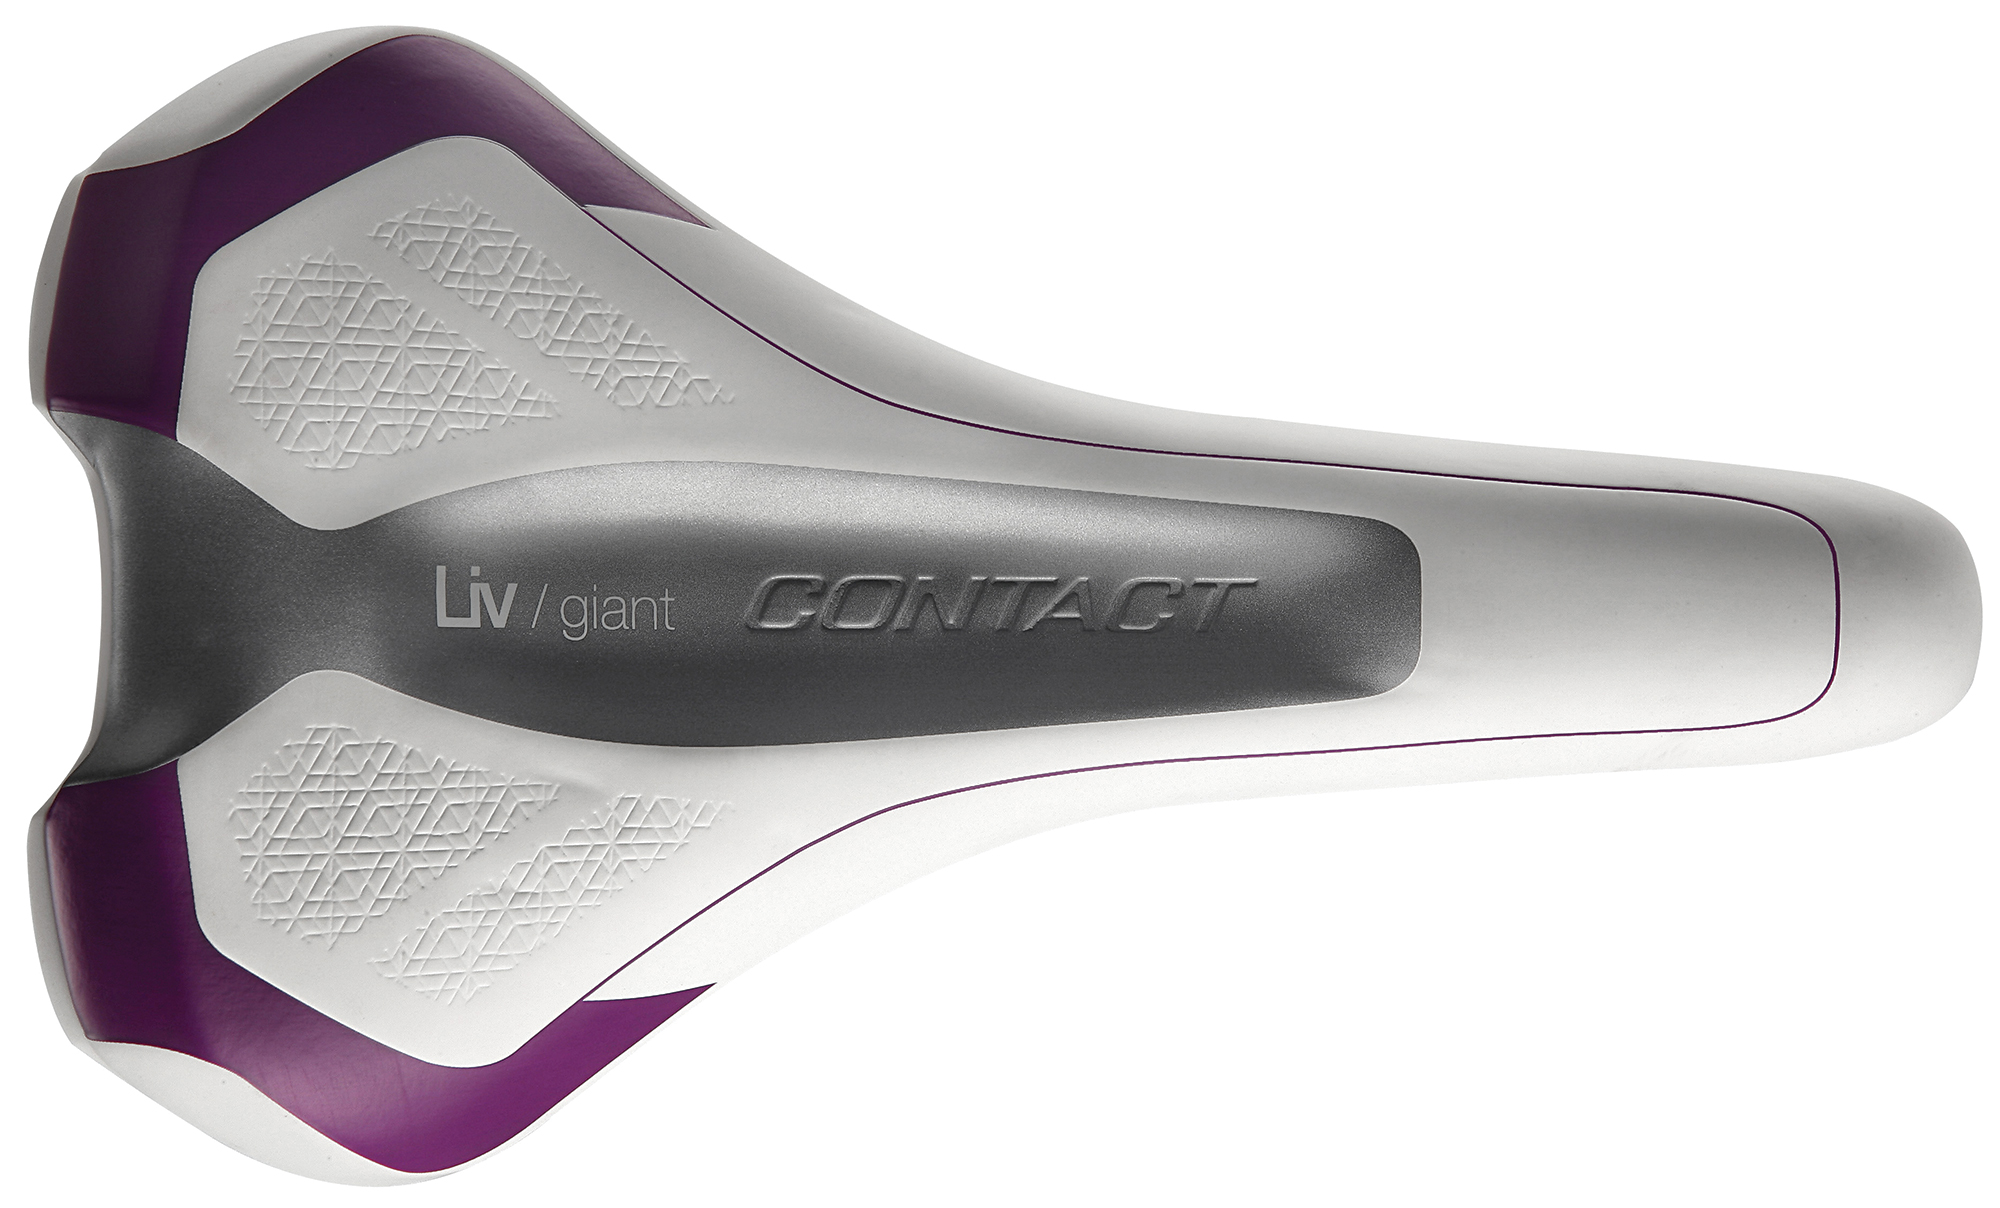 Details about   NEW Women’s Giant Liv Comfort Hybrid Bicycle Saddle with Cut Out-Cruiser 